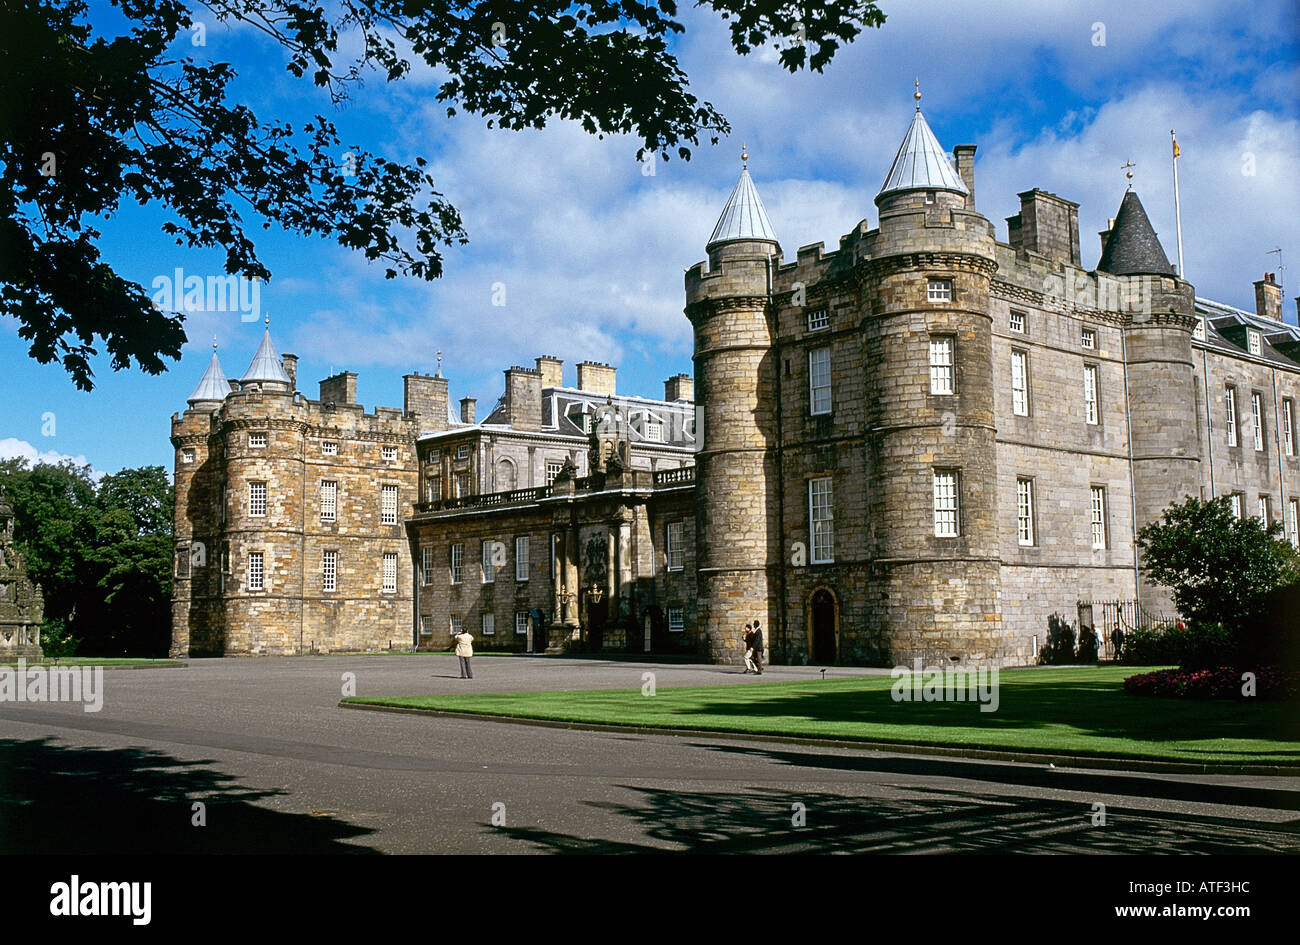 Holyrood Palace pepper pot towers and facade in Edinburgh Stock Photo